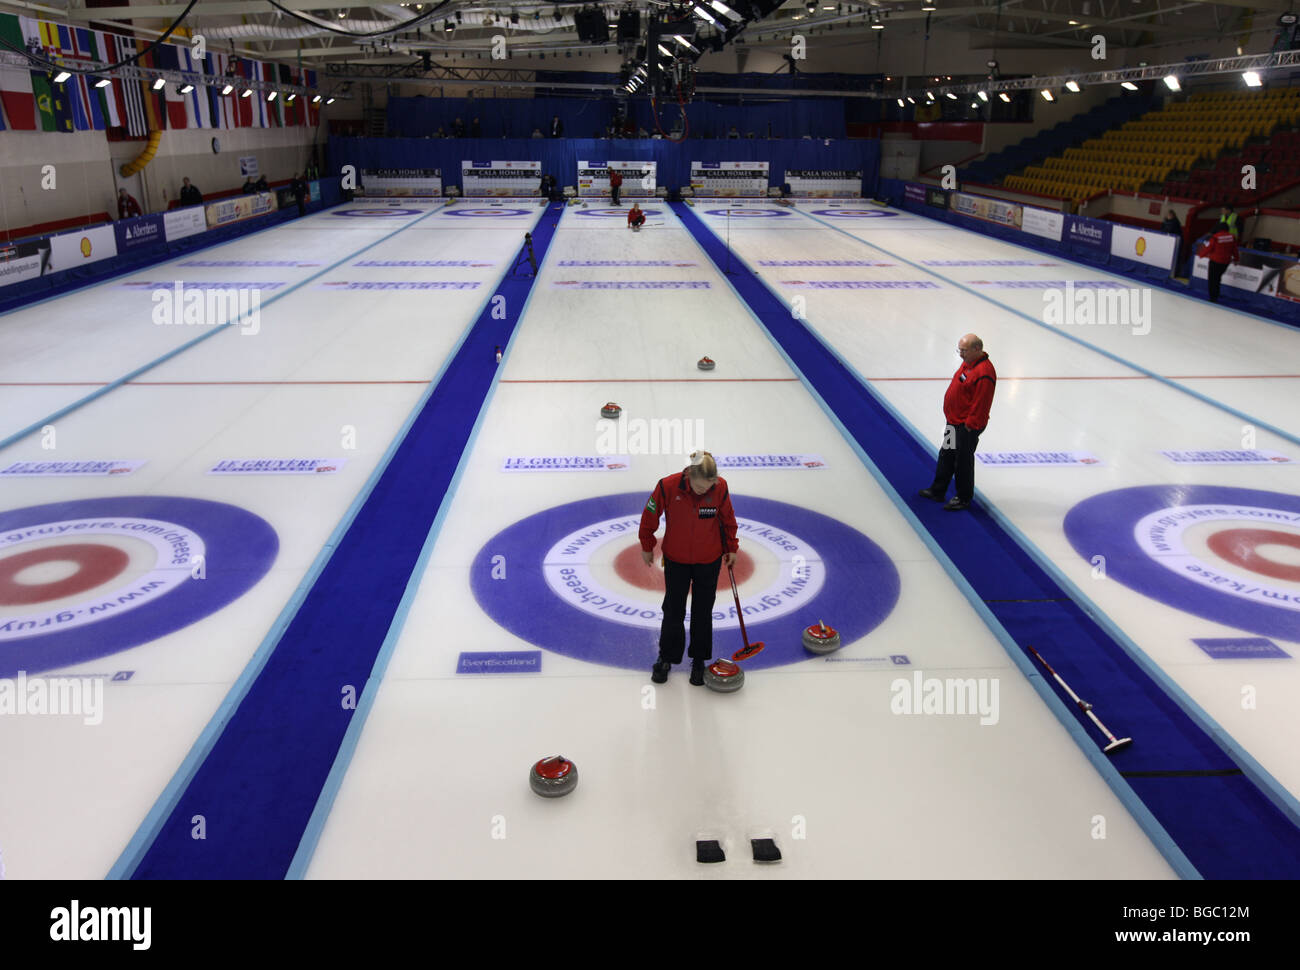 The Linx Ice Arena in Aberdeen, Scotland, UK, set up for a European curling competition on the ice. Stock Photo